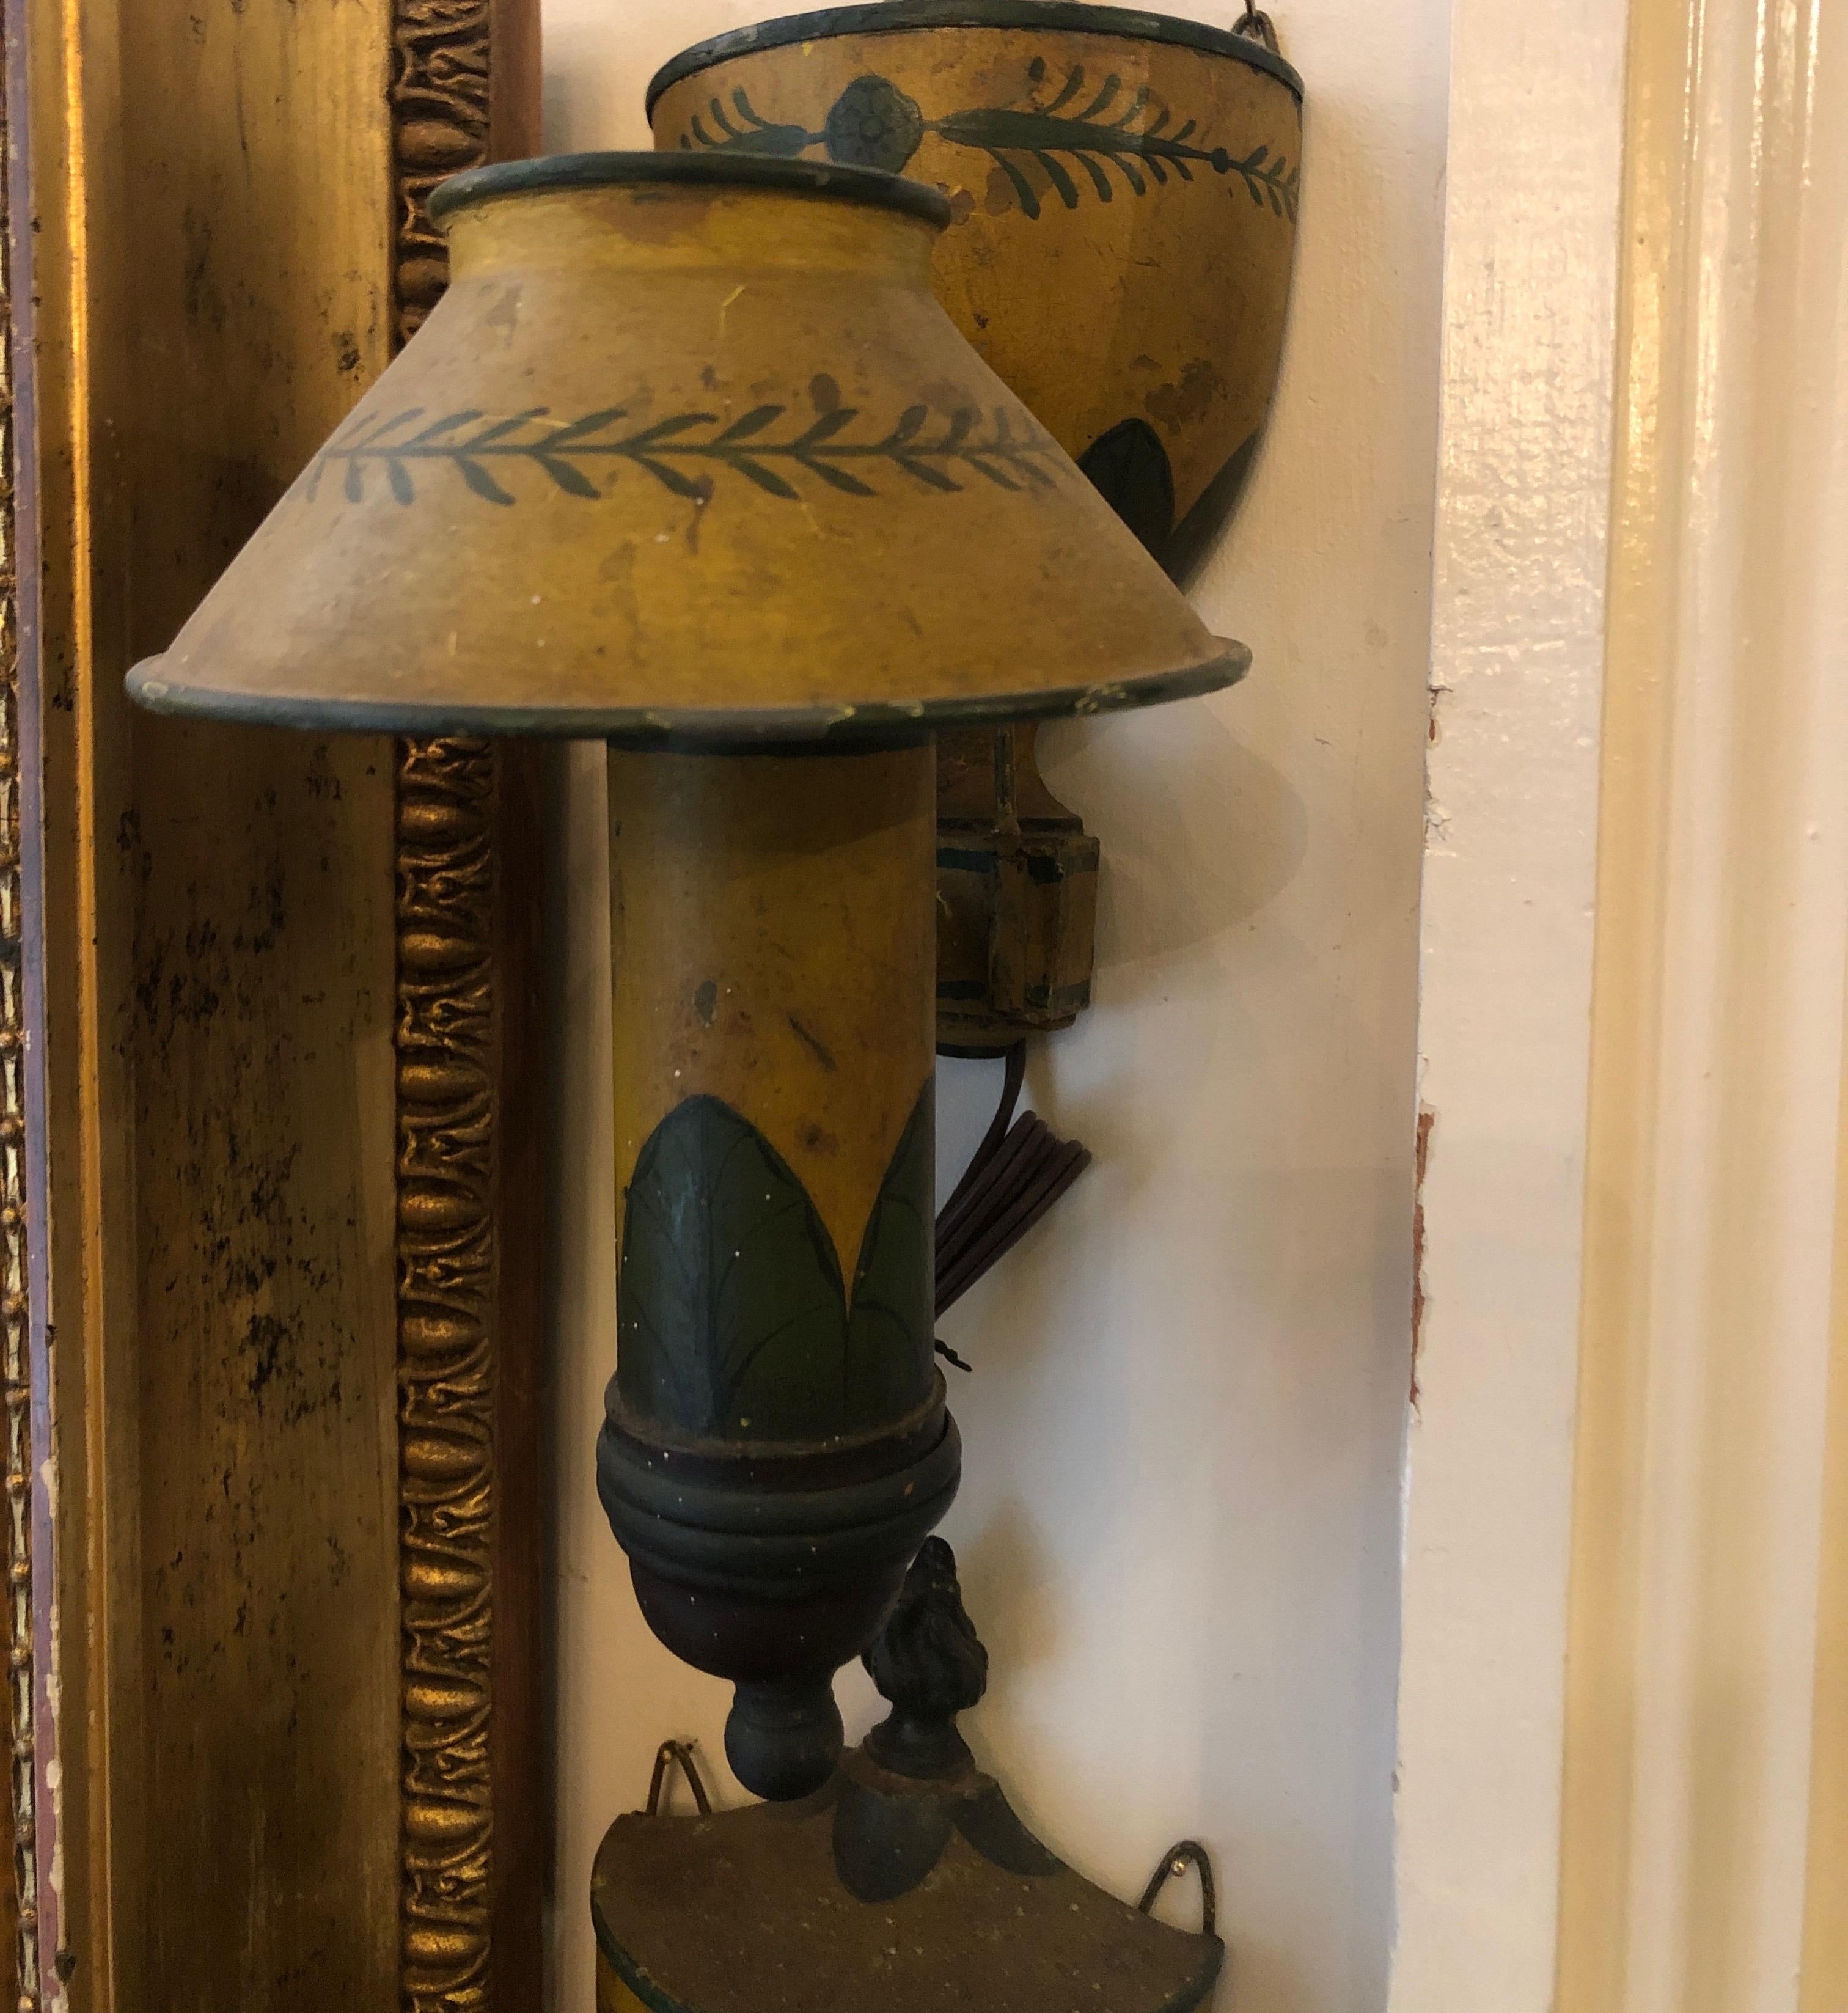 Pair of late 19th-early 20th century wall sconces wired for electricity. Shades removable. The paint appears original and has darkened with age.